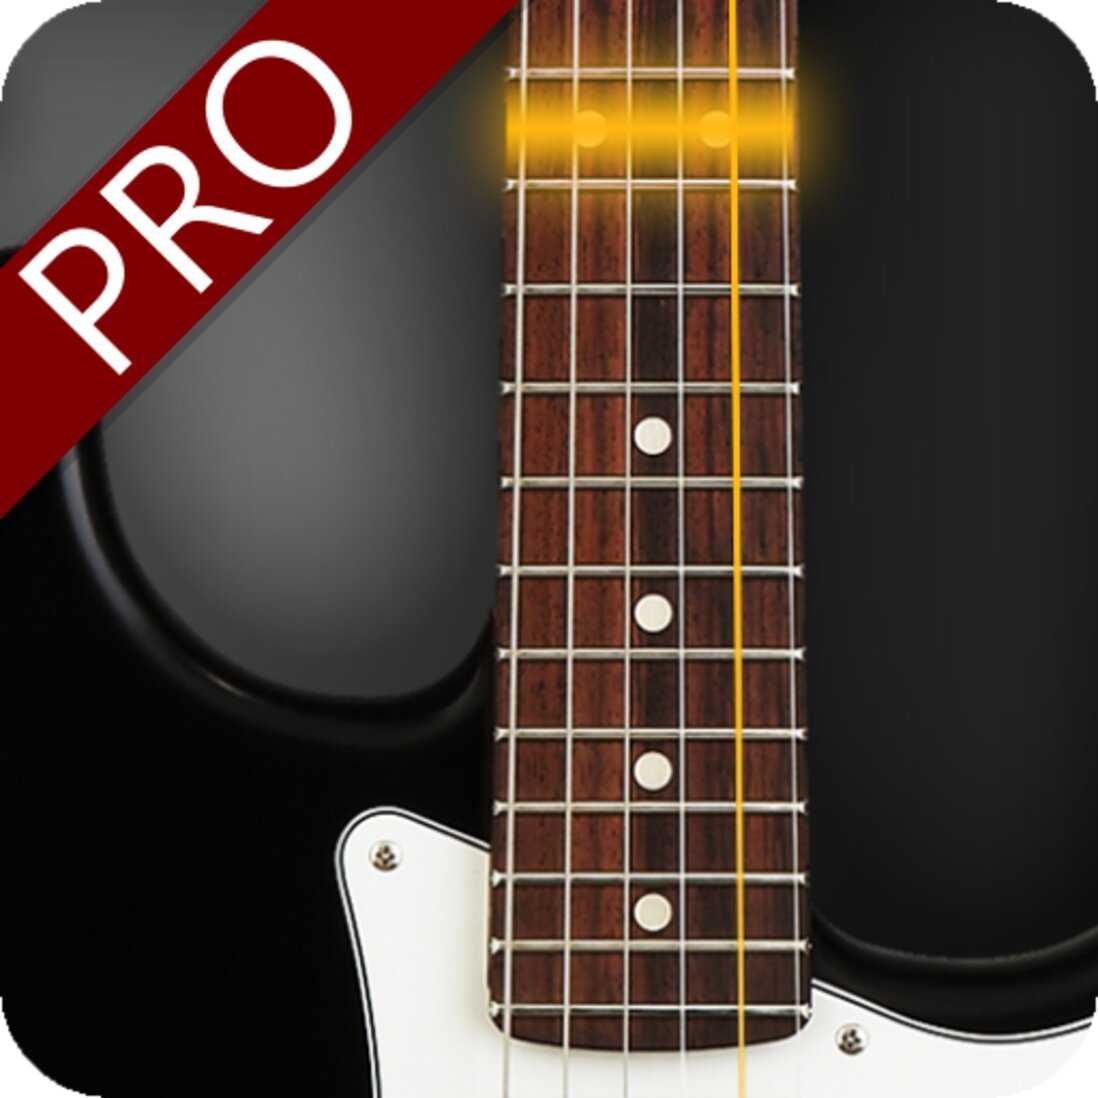 Guitar Scales & Chords Pro v127 (Paid) APK